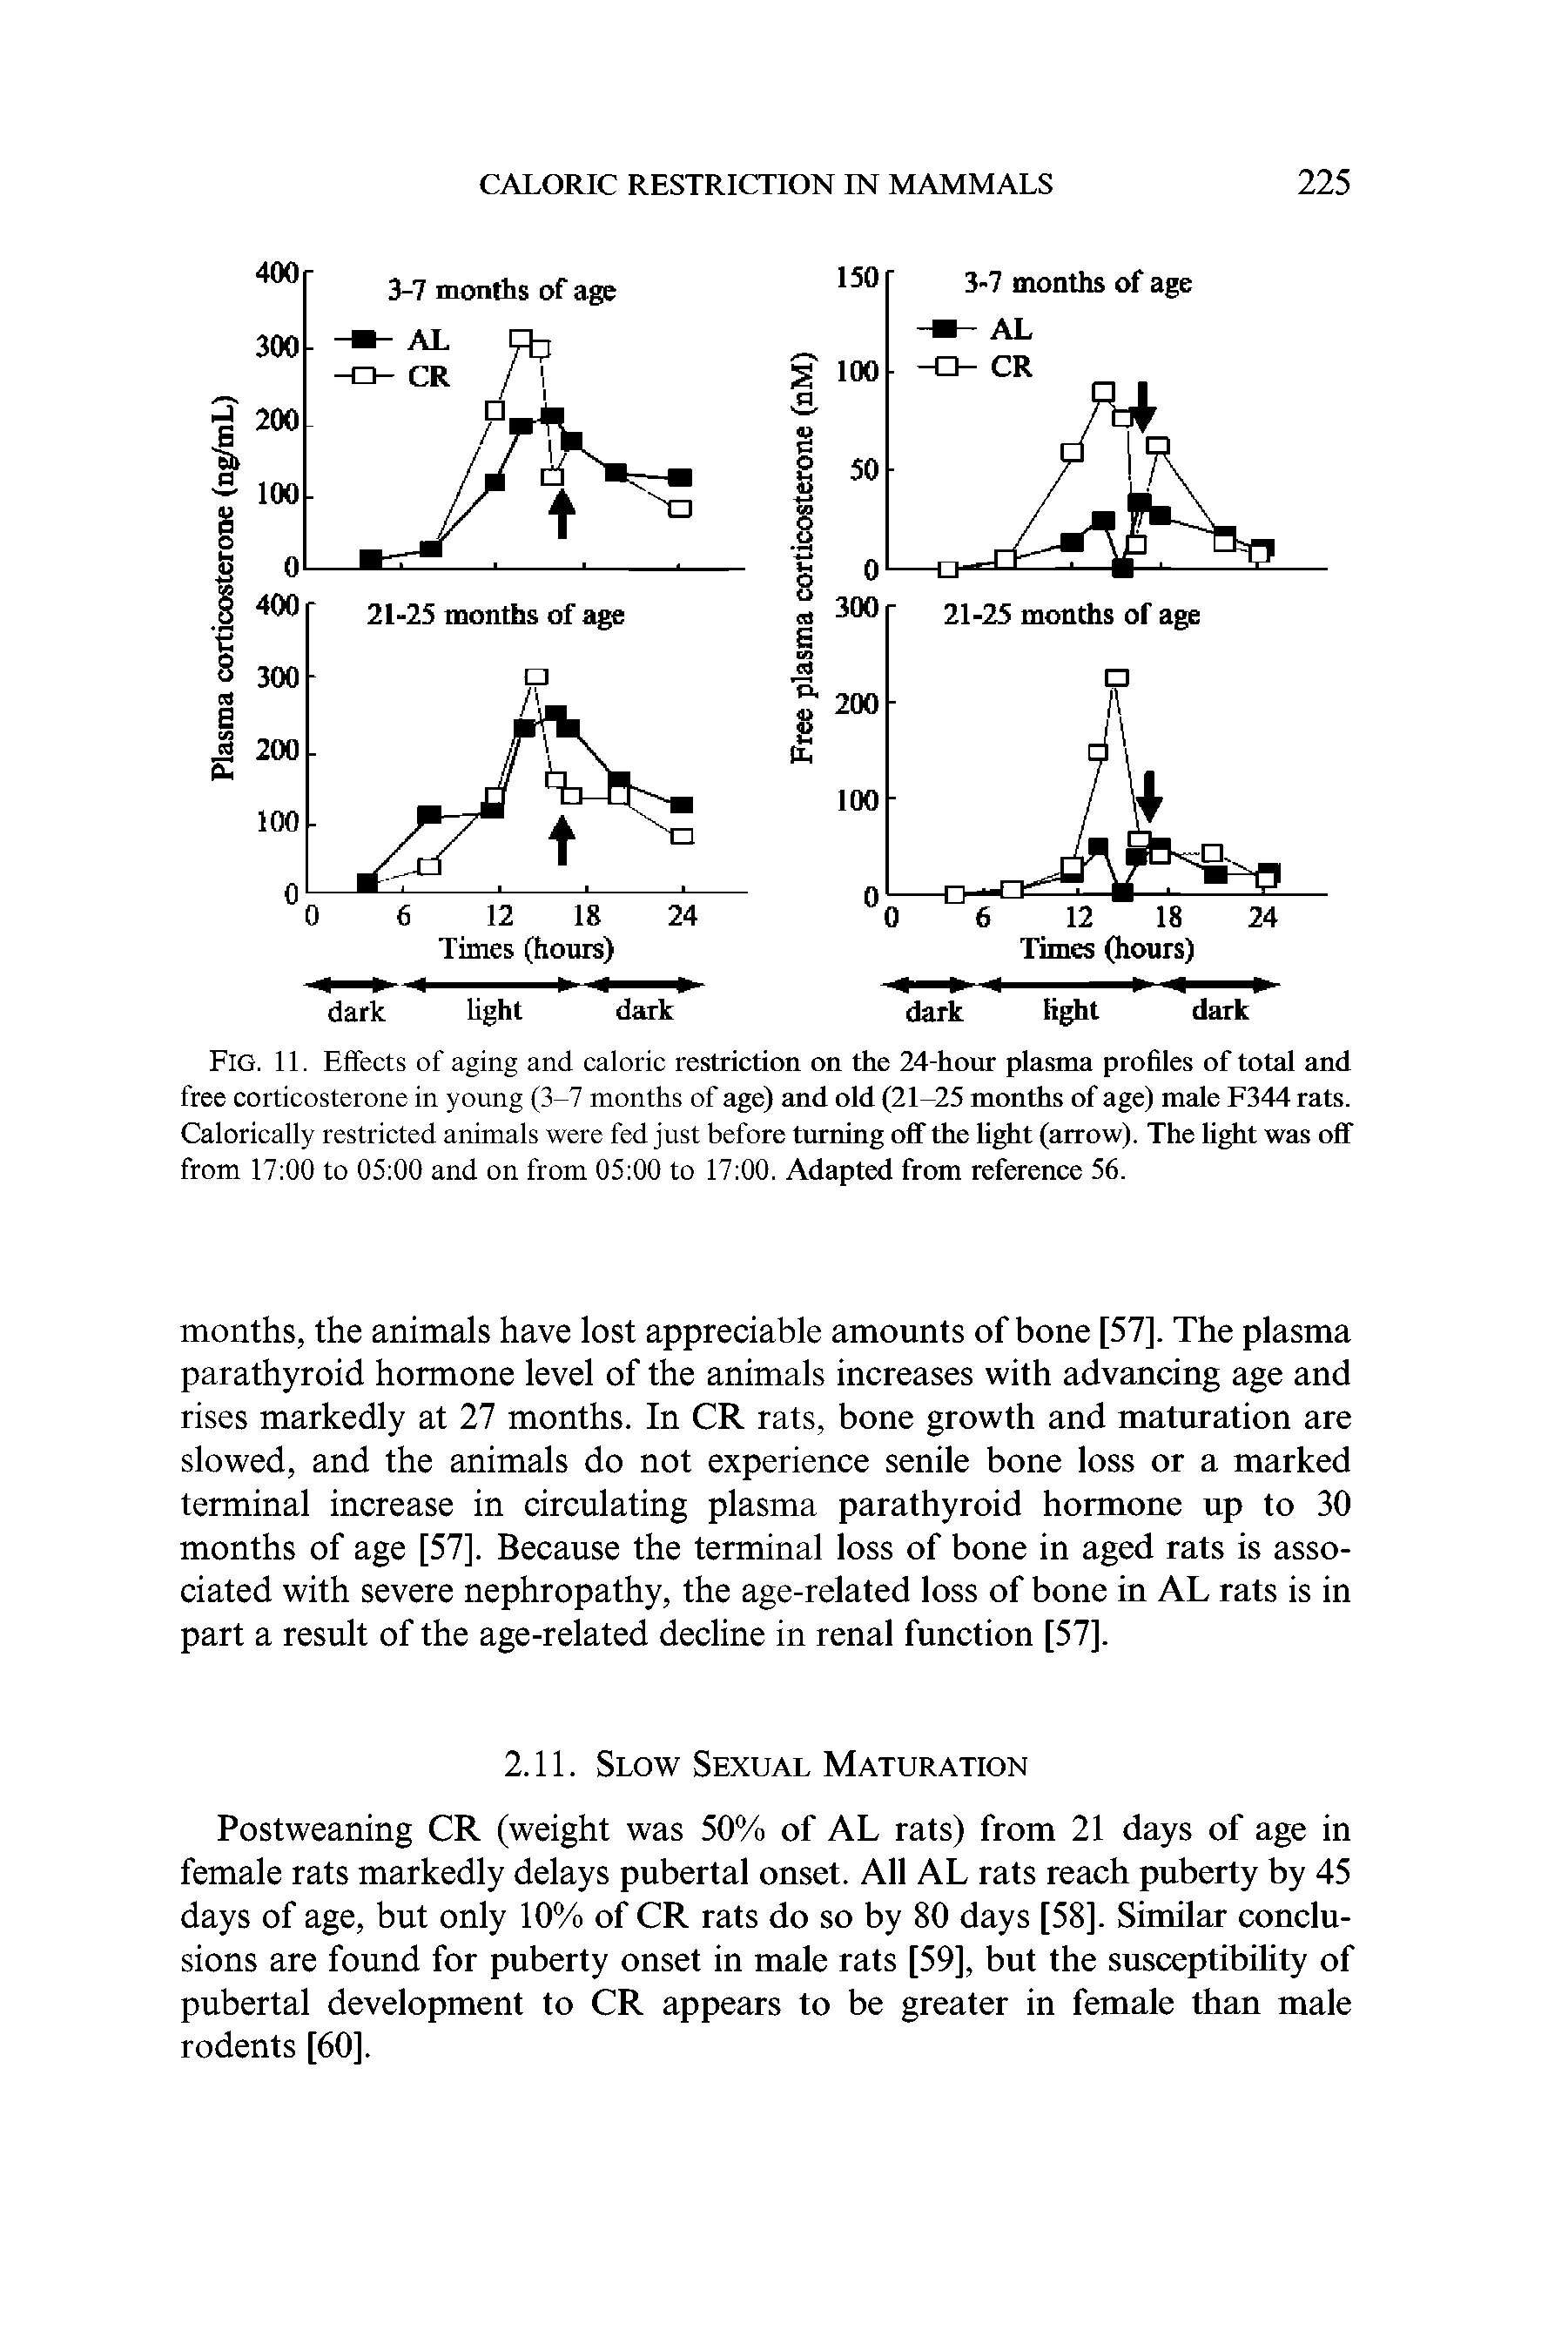 Fig. 11. Effects of aging and caloric restriction on the 24-hour plasma profiles of total and free corticosterone in young (3-7 months of age) and old (21-25 months of age) male F344 rats. Calorically restricted animals were fed just before turning off the light (arrow). The light was off from 17 00 to 05 00 and on from 05 00 to 17 00. Adapted from reference 56.